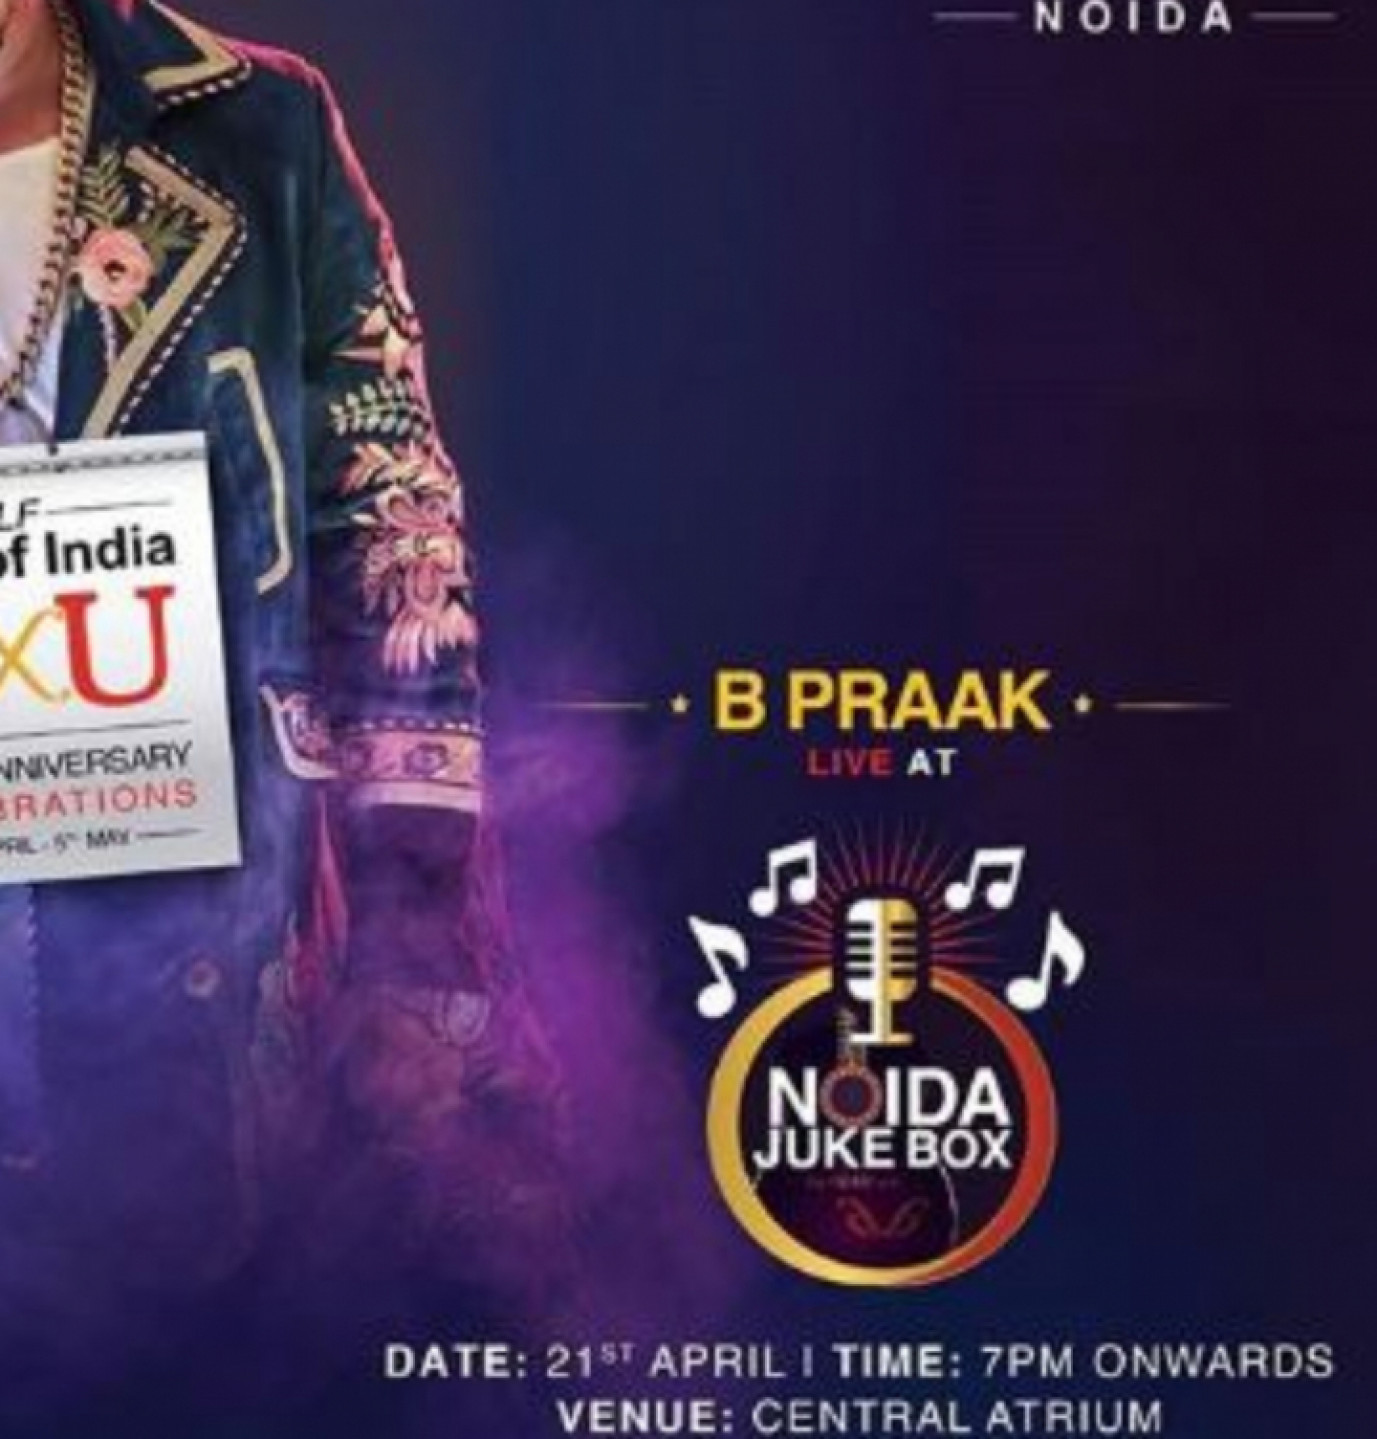 UNWIND WITH SOULFUL MUSIC AND MYSTICISM WITH SINGER “B PRAAK